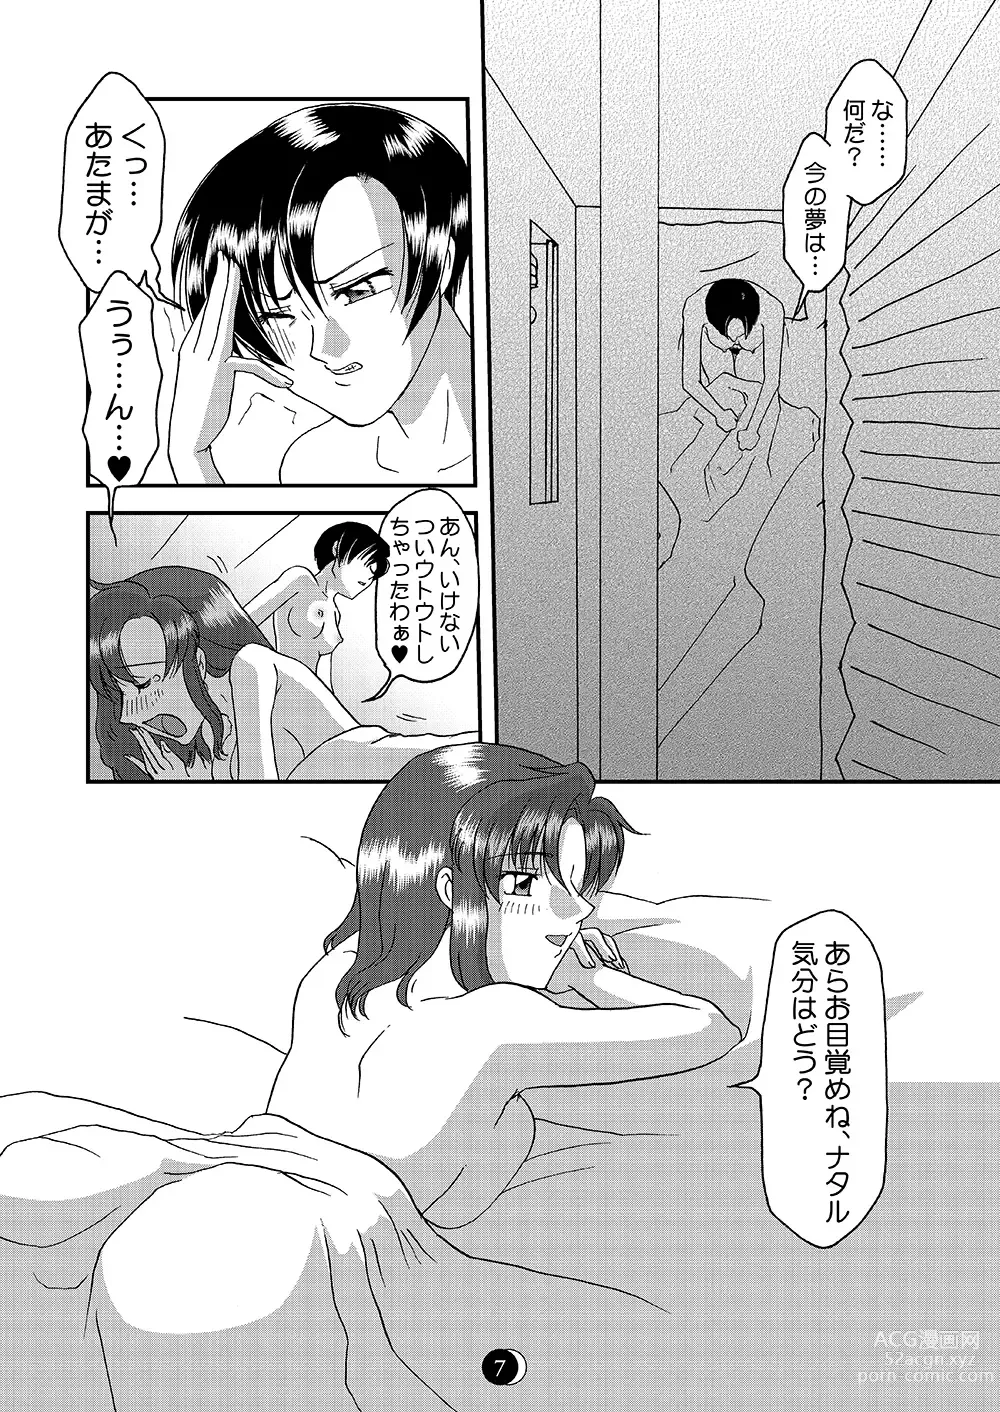 Page 4 of doujinshi This Night